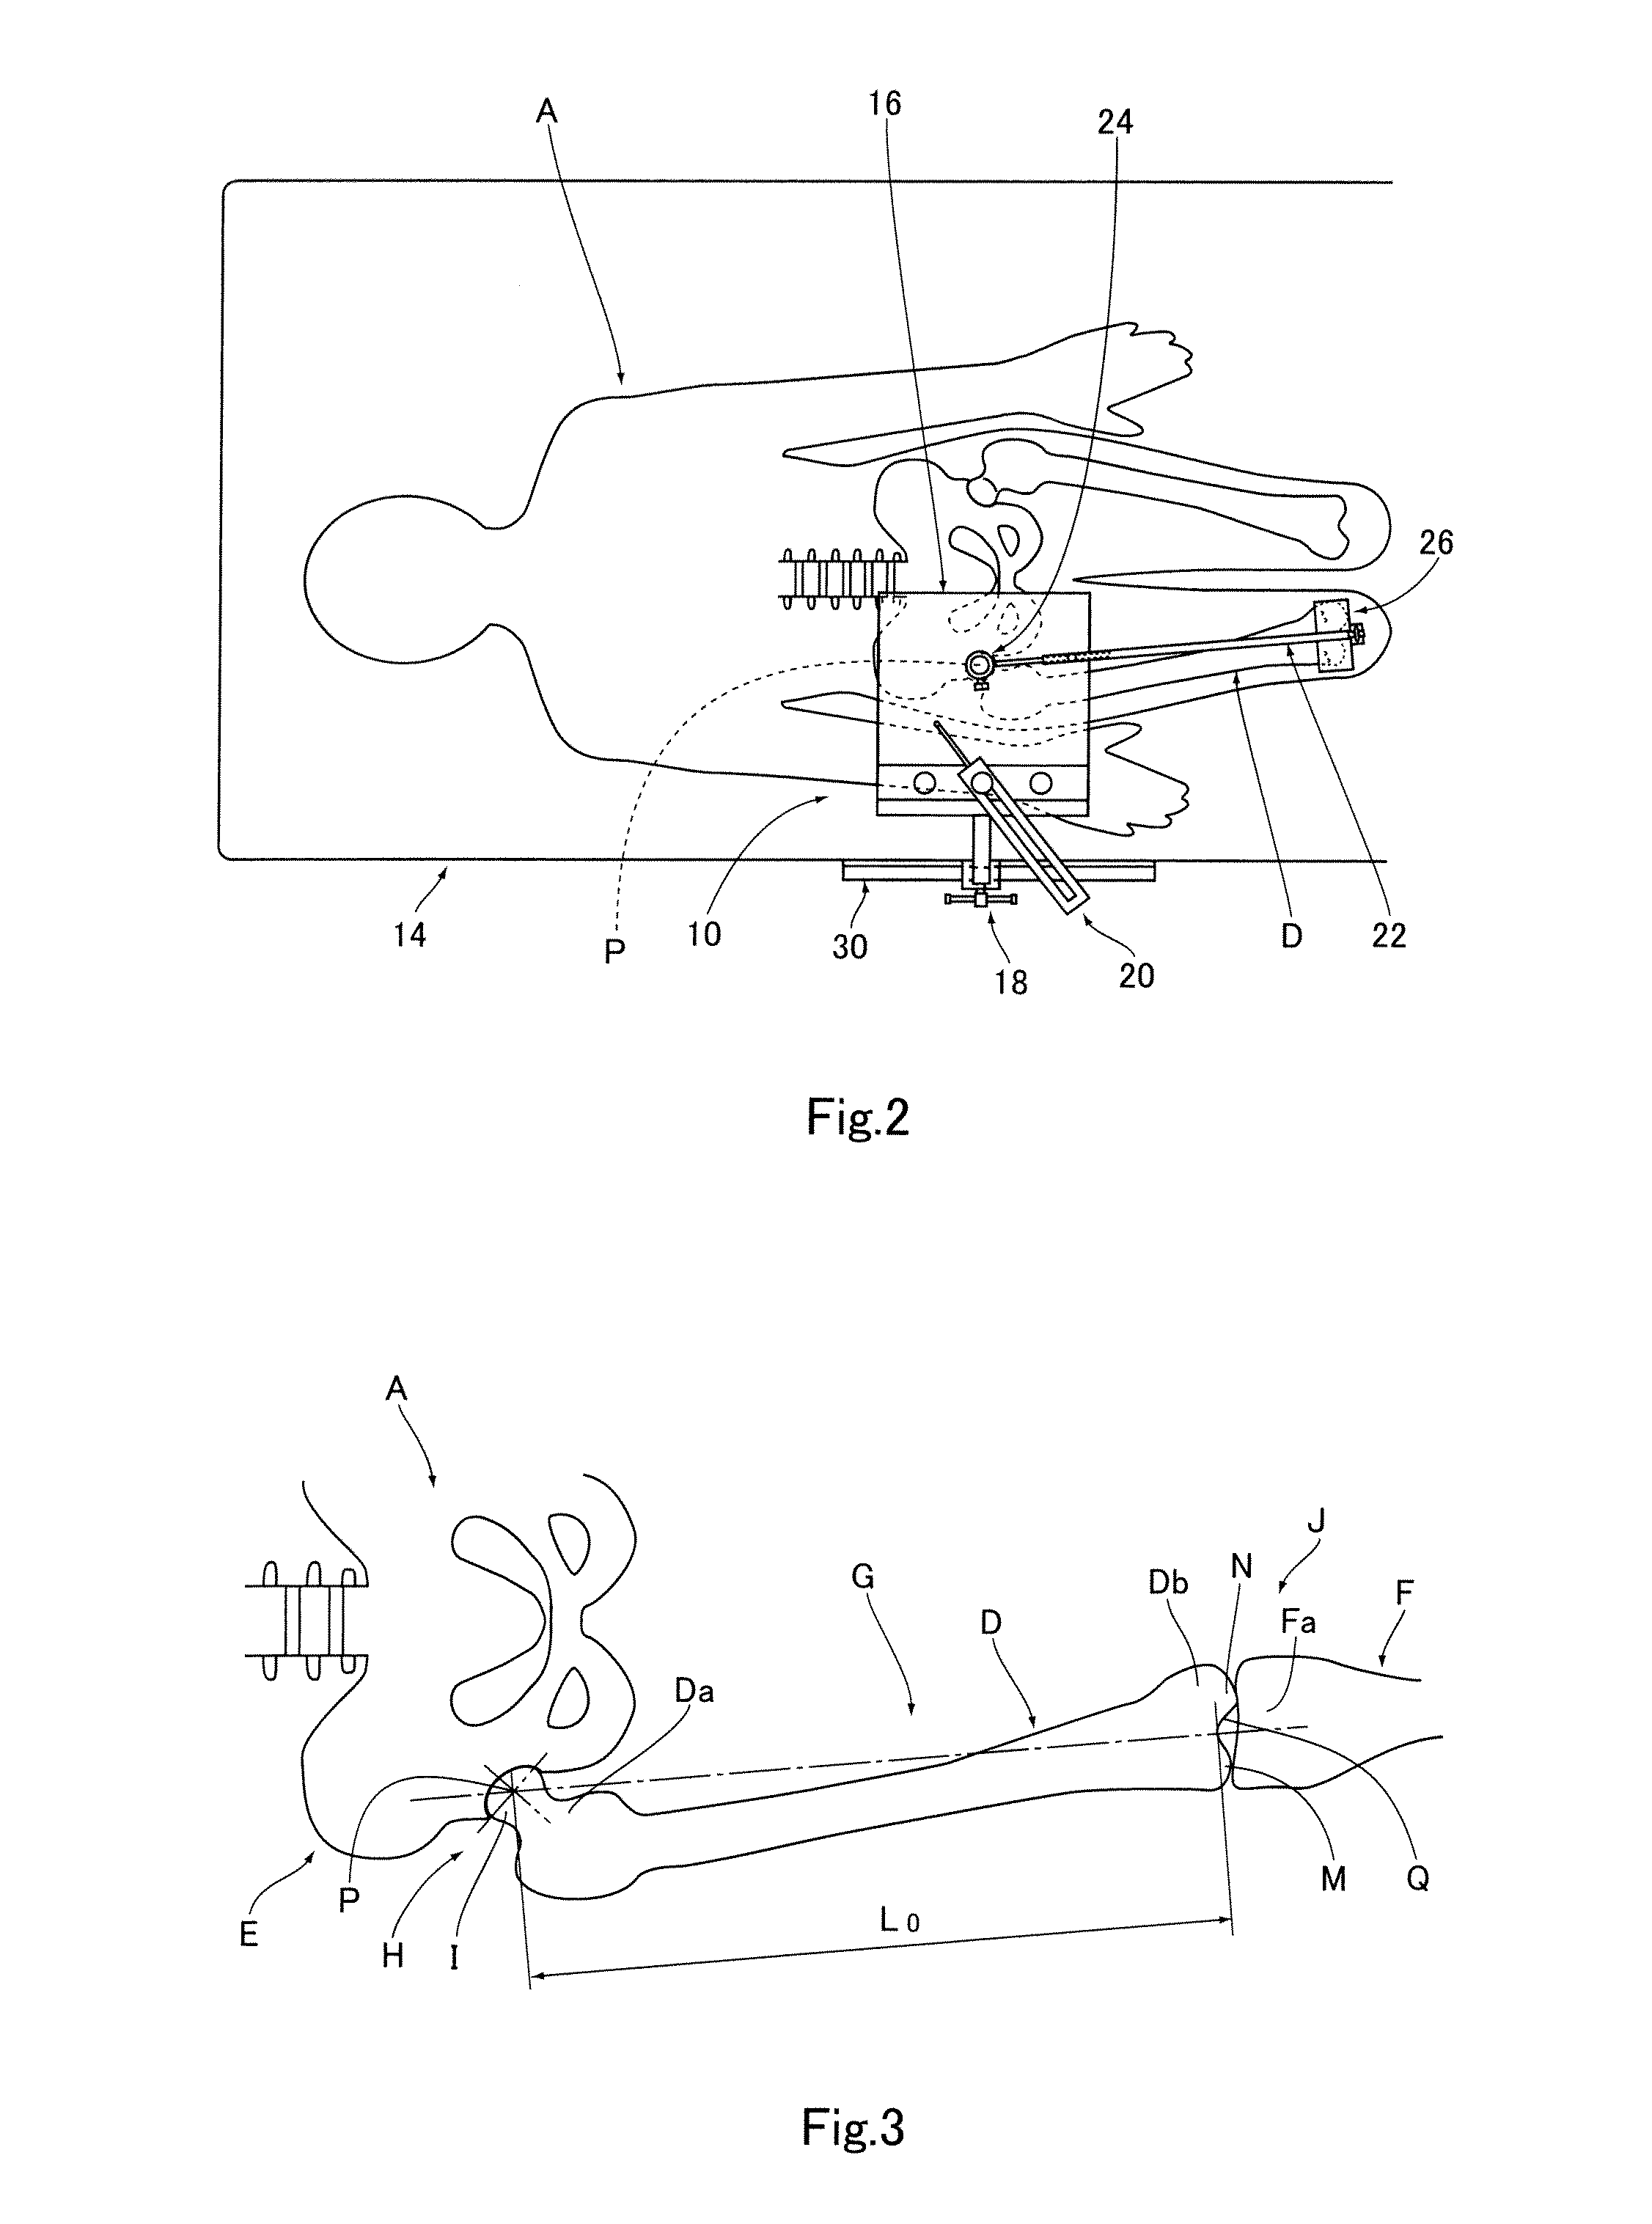 Apparatus for identifying femoral head center